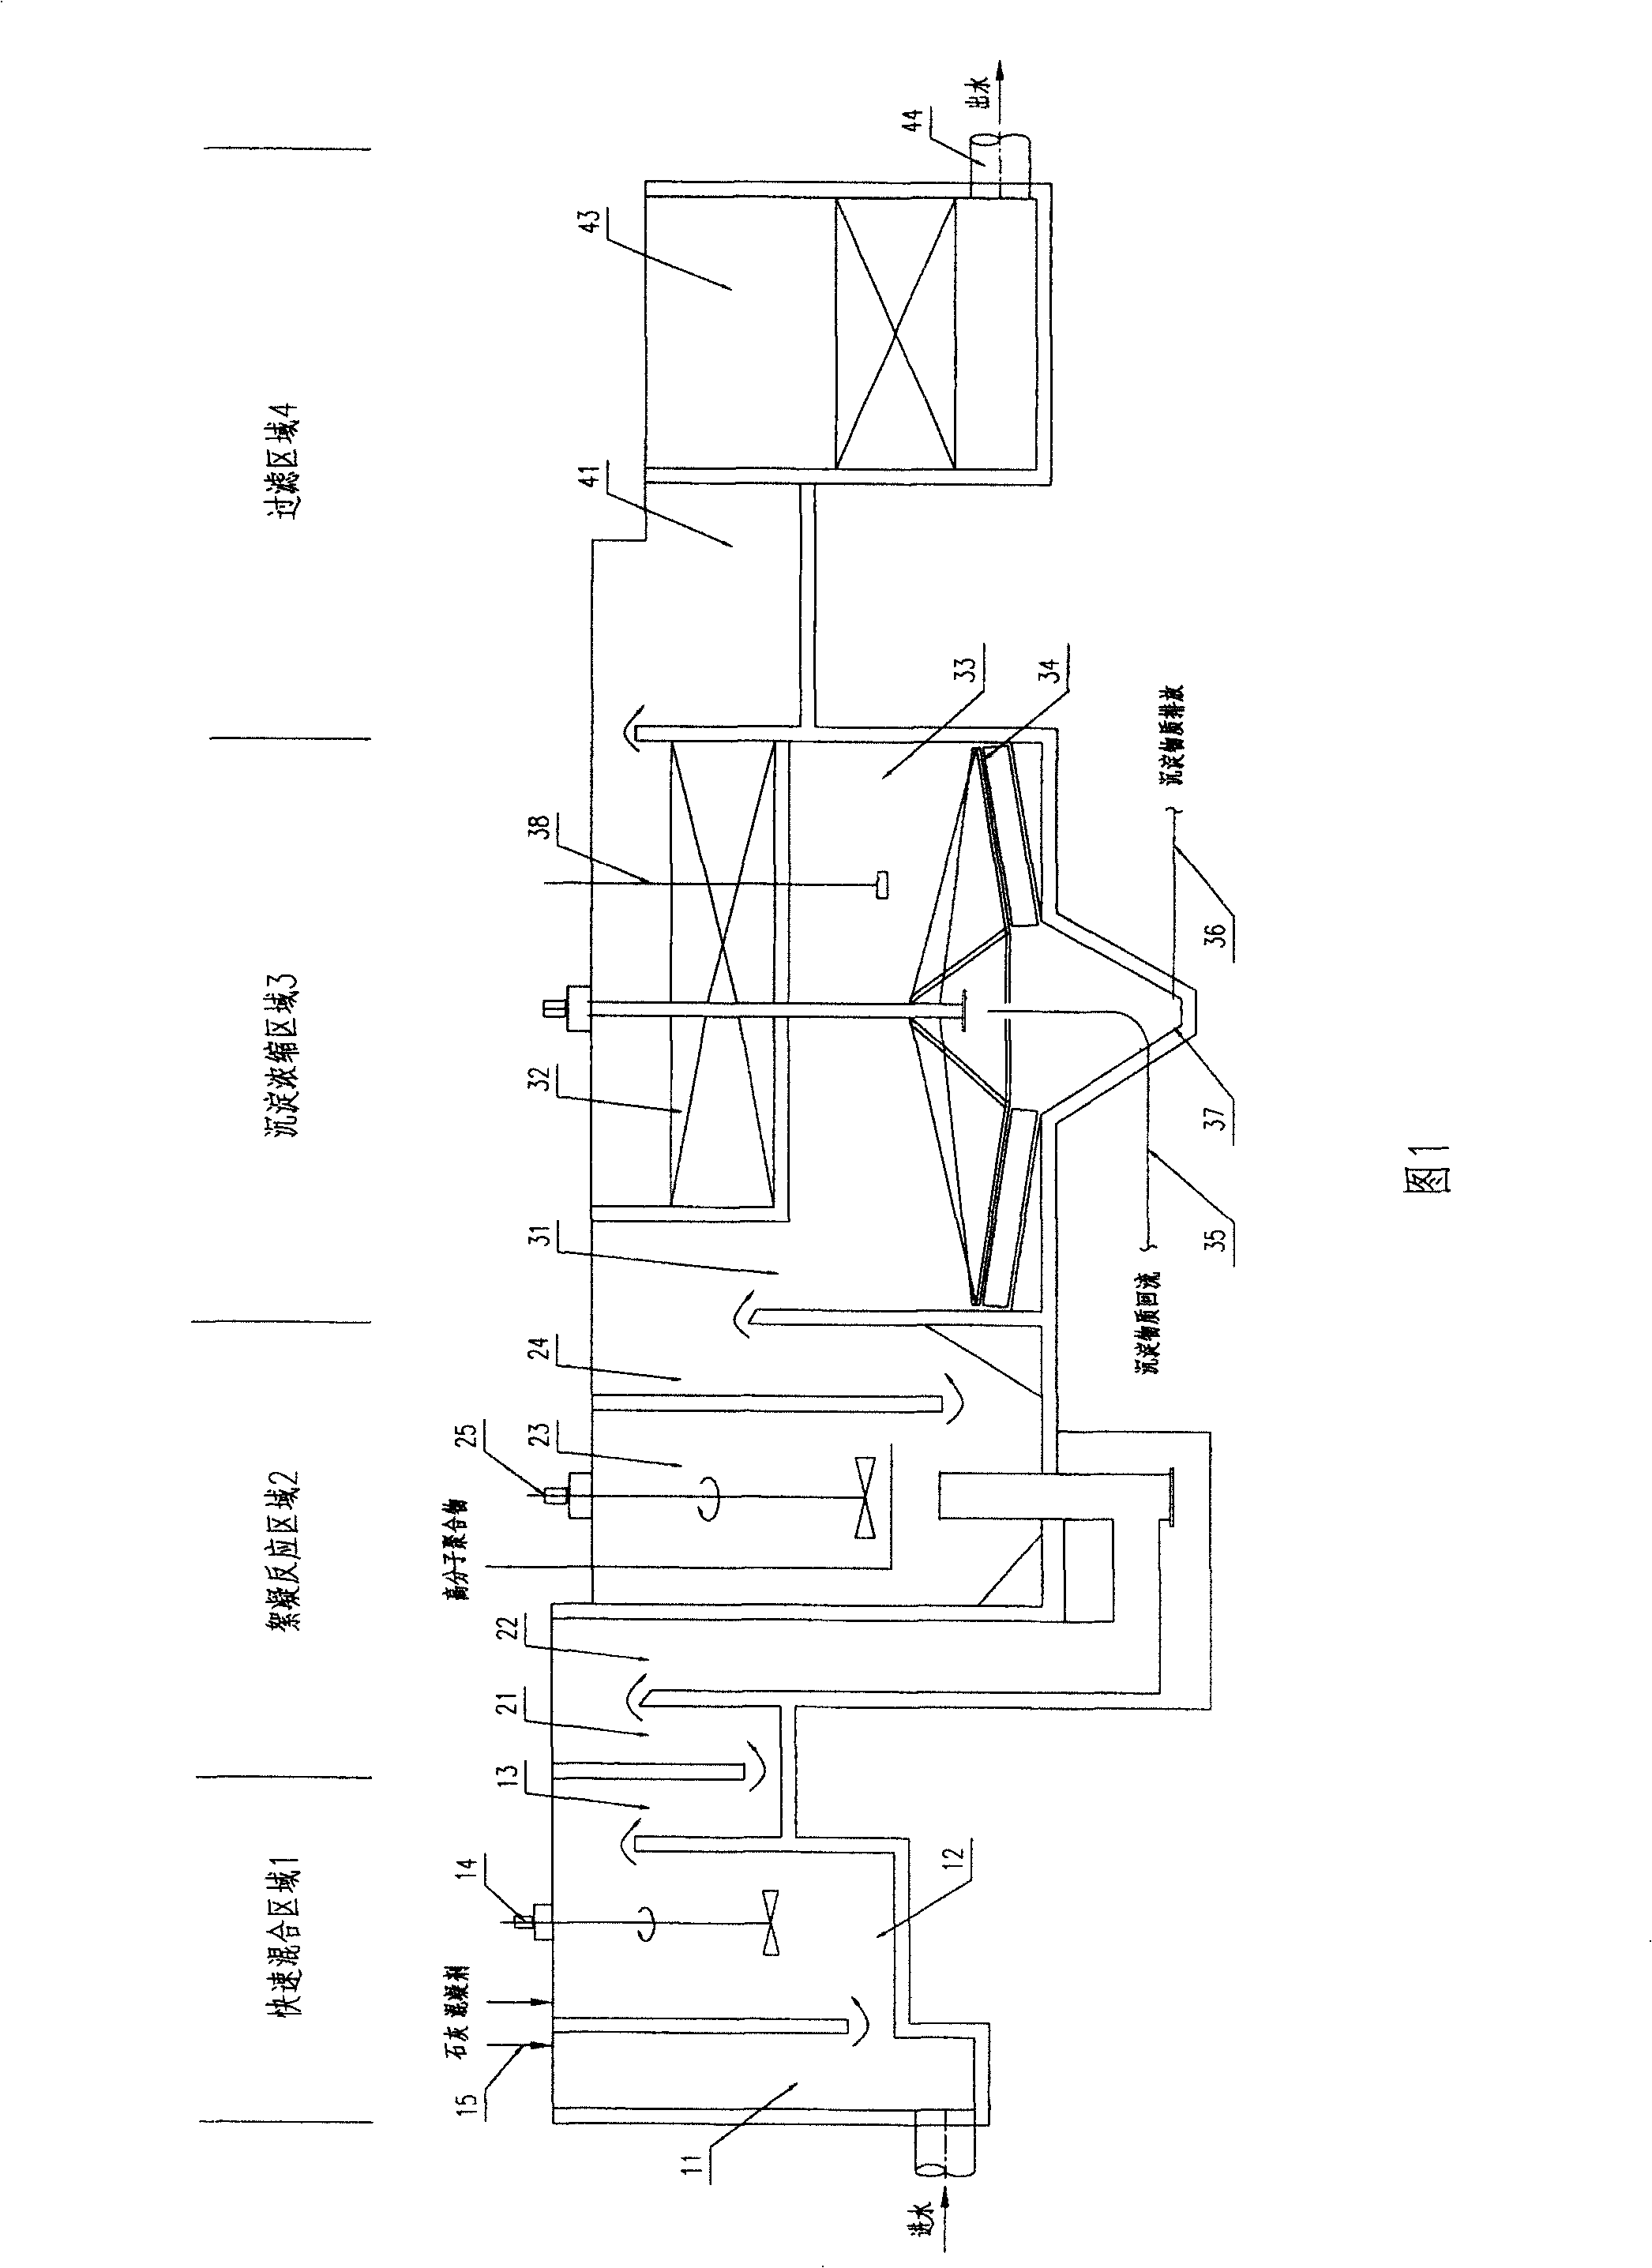 Method and equipment for purifying recirculated cooling water or town B-grade sewage